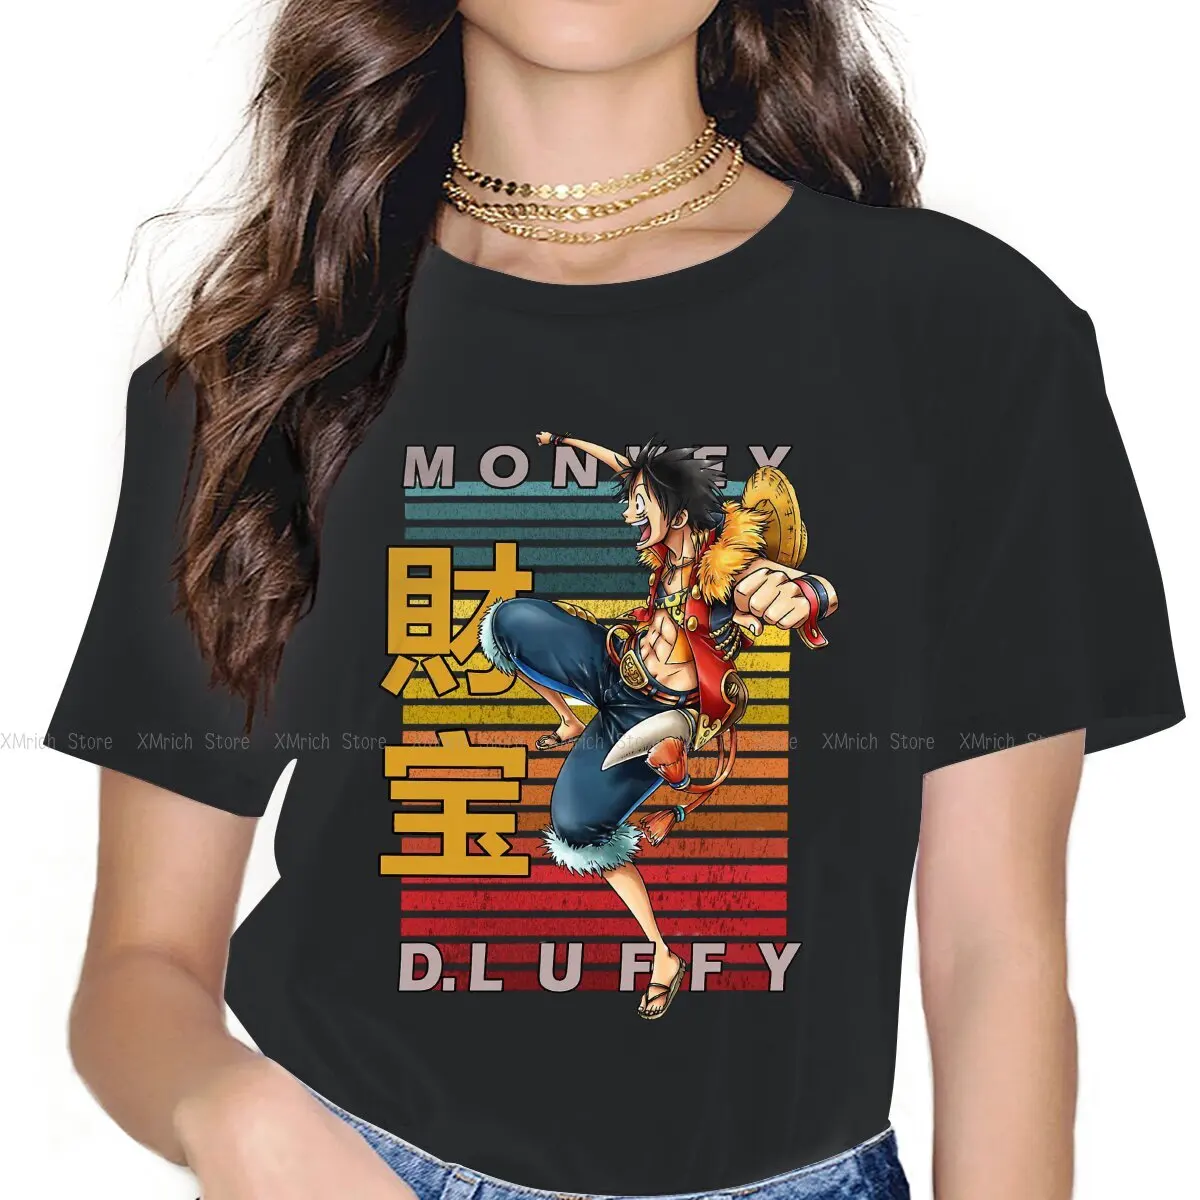 

Humor Monkey D Luffy T-Shirt Women O Neck Pure Cotton T Shirts One Piece Anime Short Sleeve Tees Gift Idea Clothes